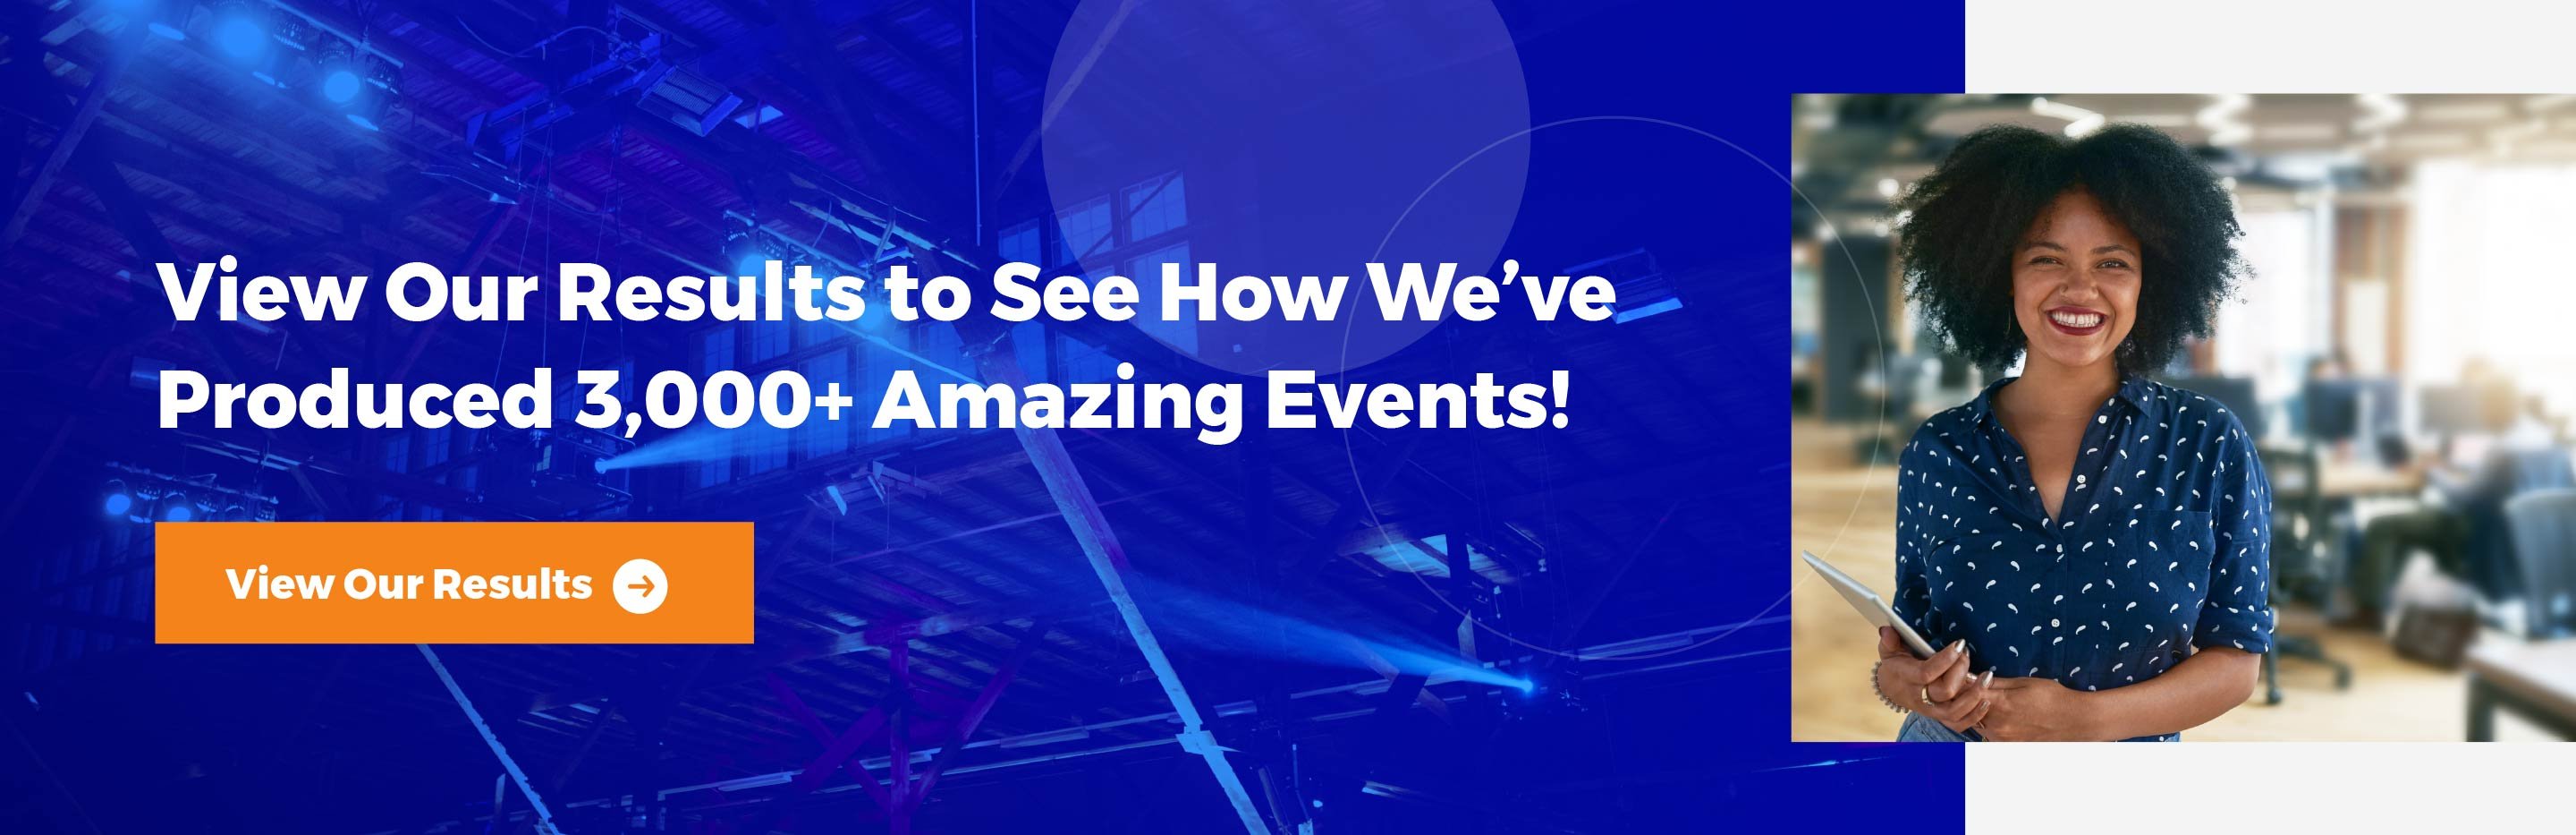 View our results to see how we've produced over 3,000 amazing events!